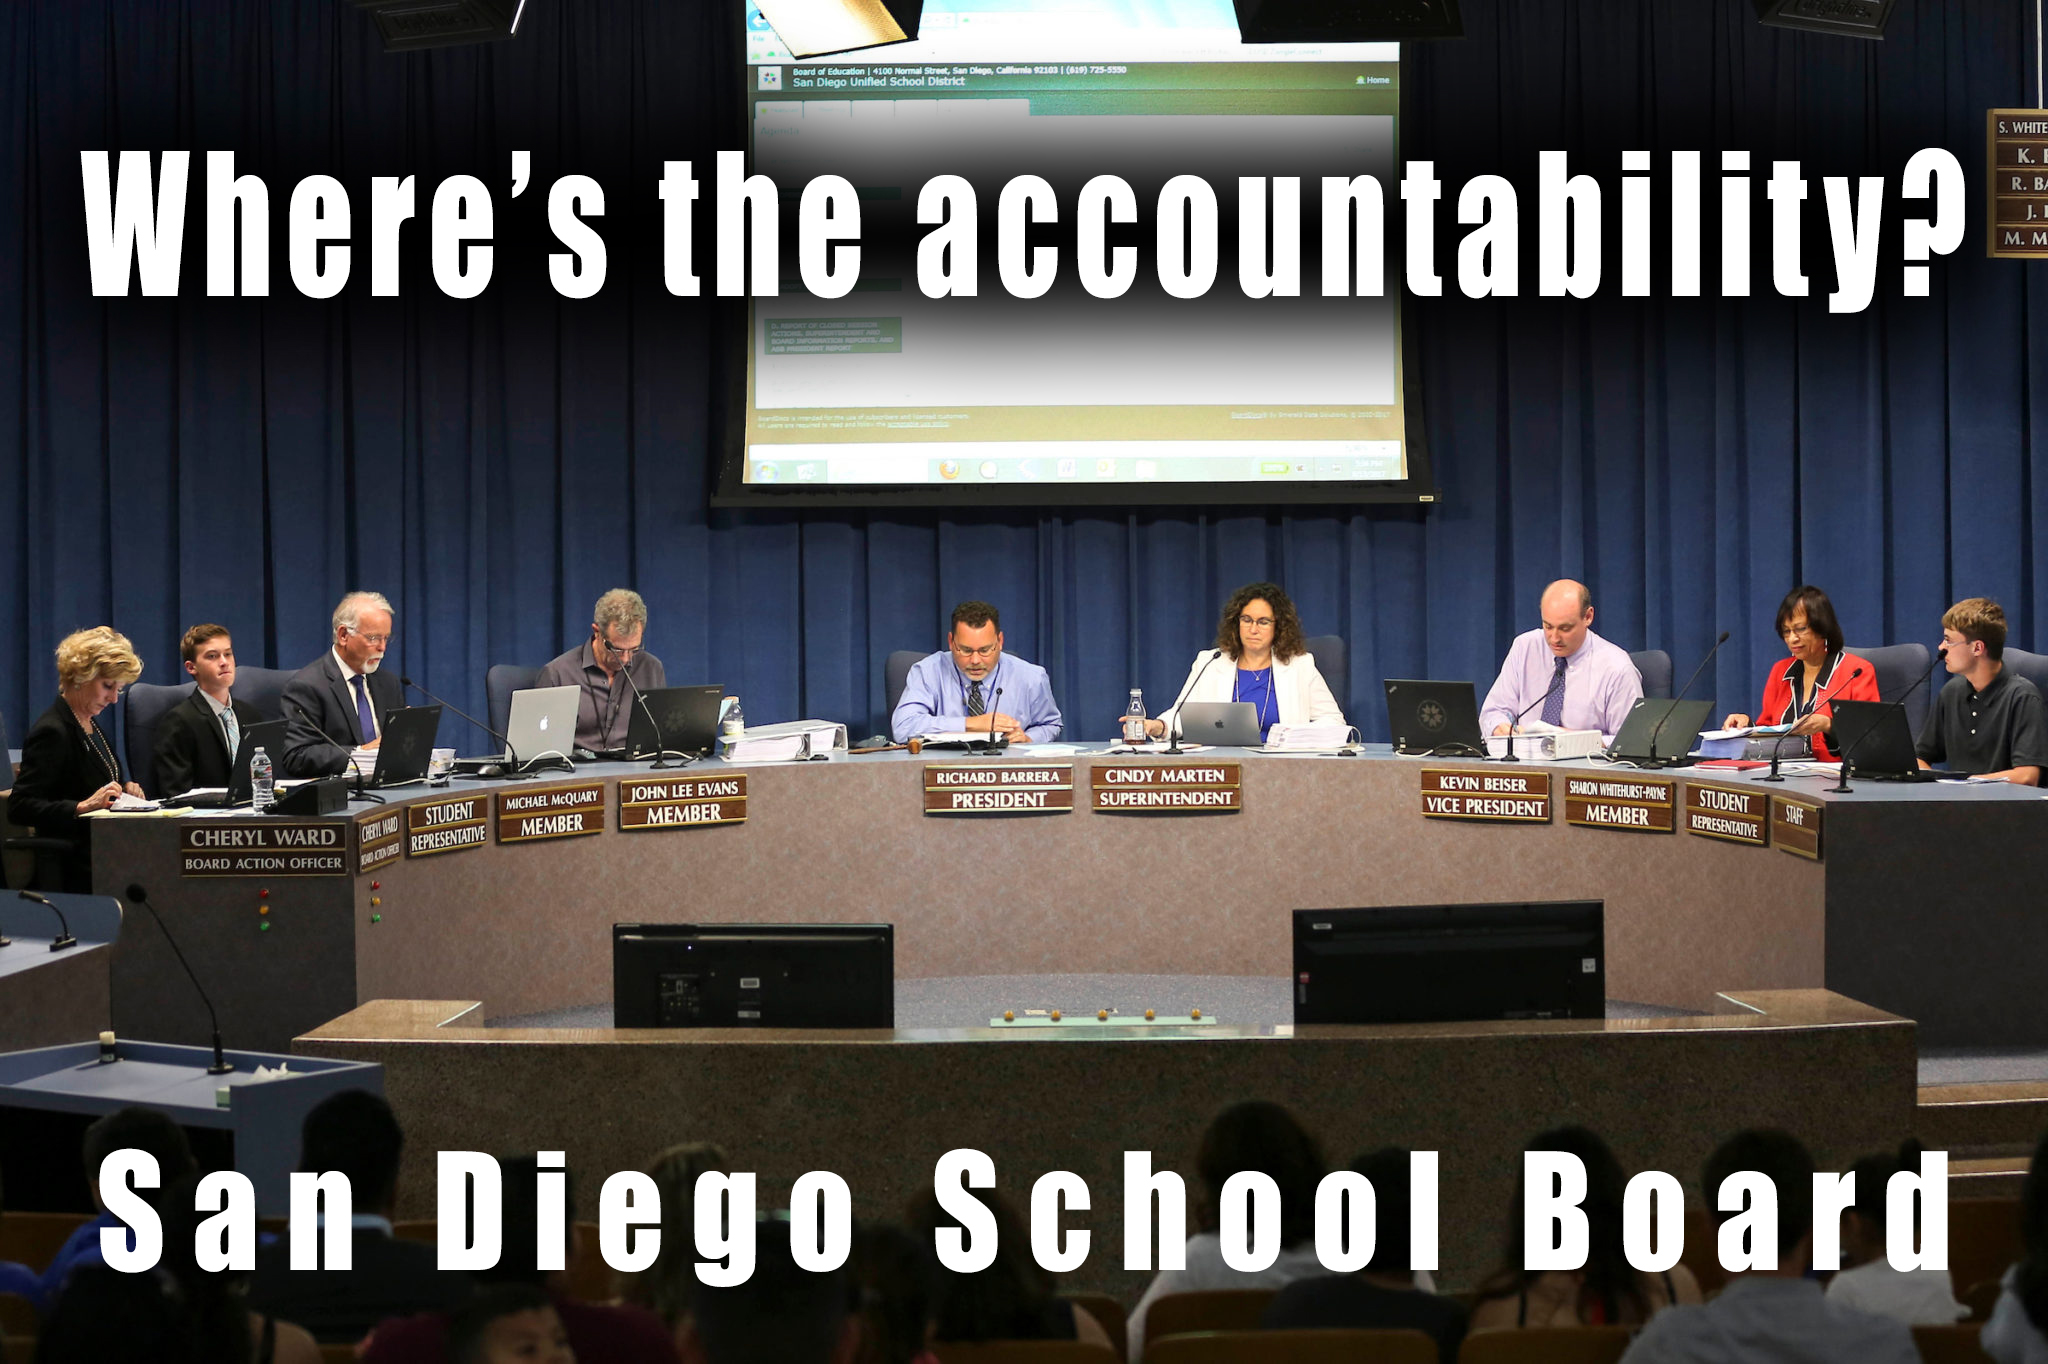 https://www.voiceofsandiego.org/topics/news/472-days-and-counting-san-diego-unified-sits-on-school-misconduct-records/